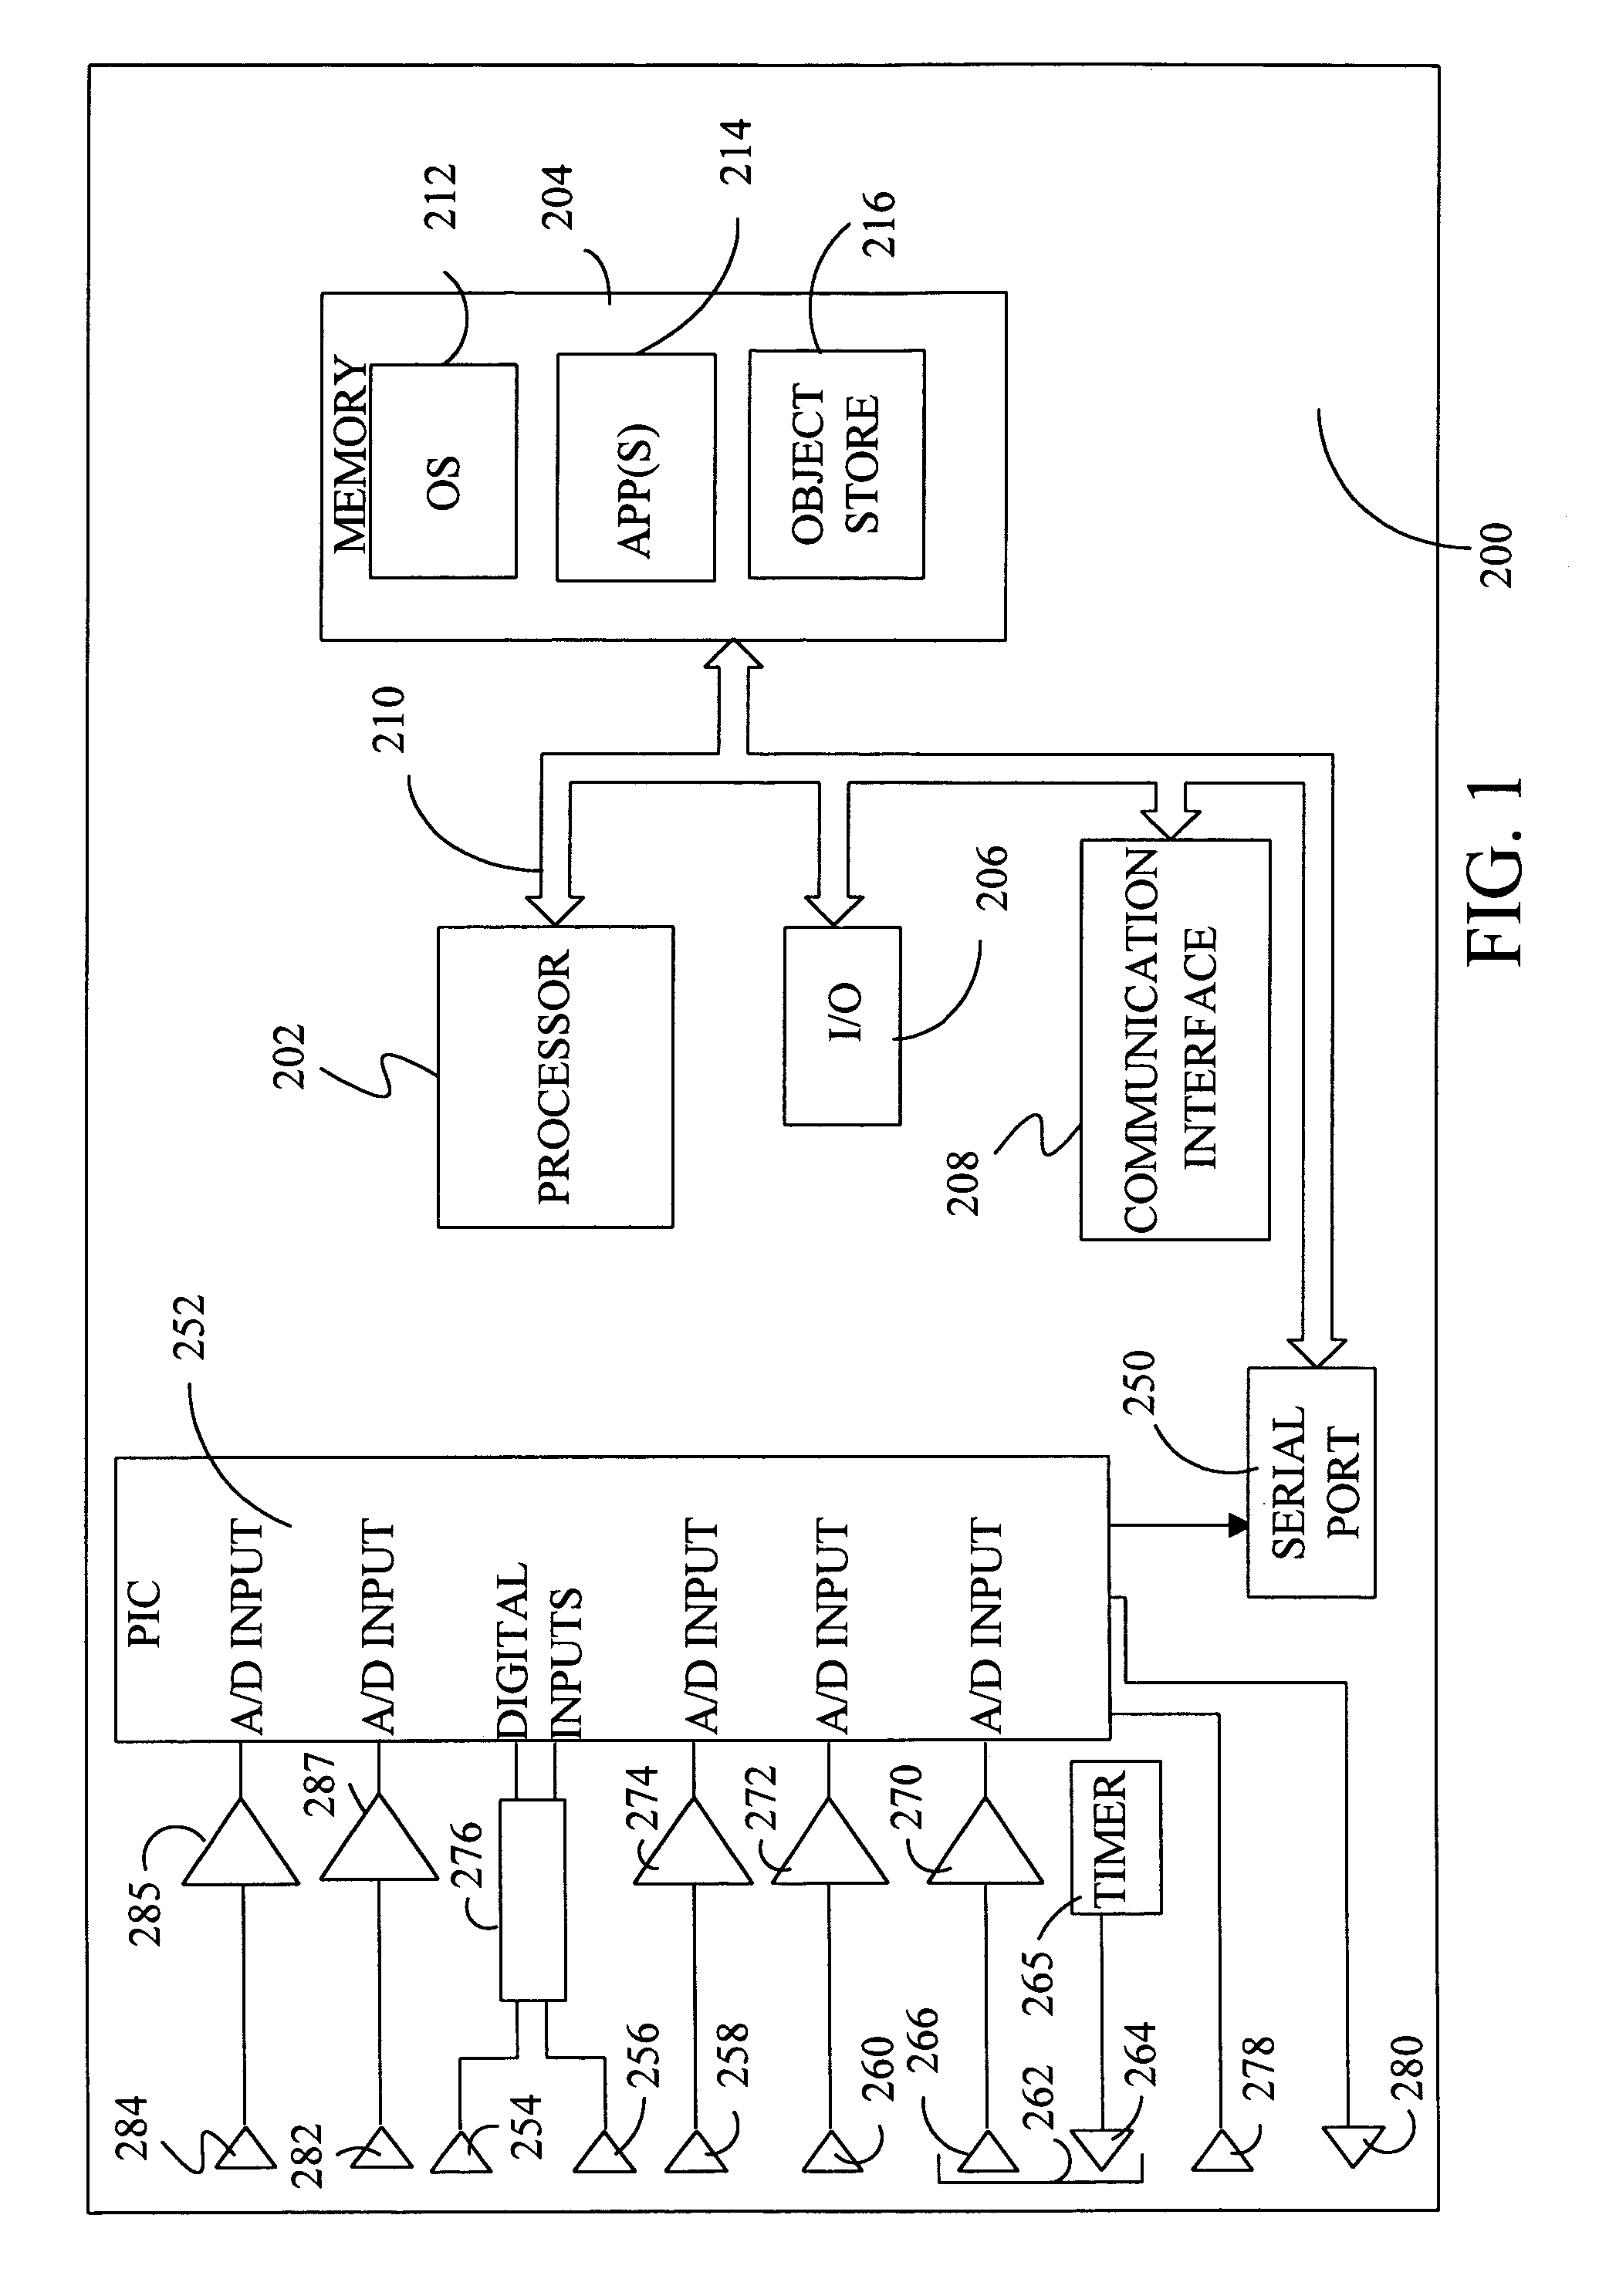 Method and apparatus using multiple sensors in a device with a display